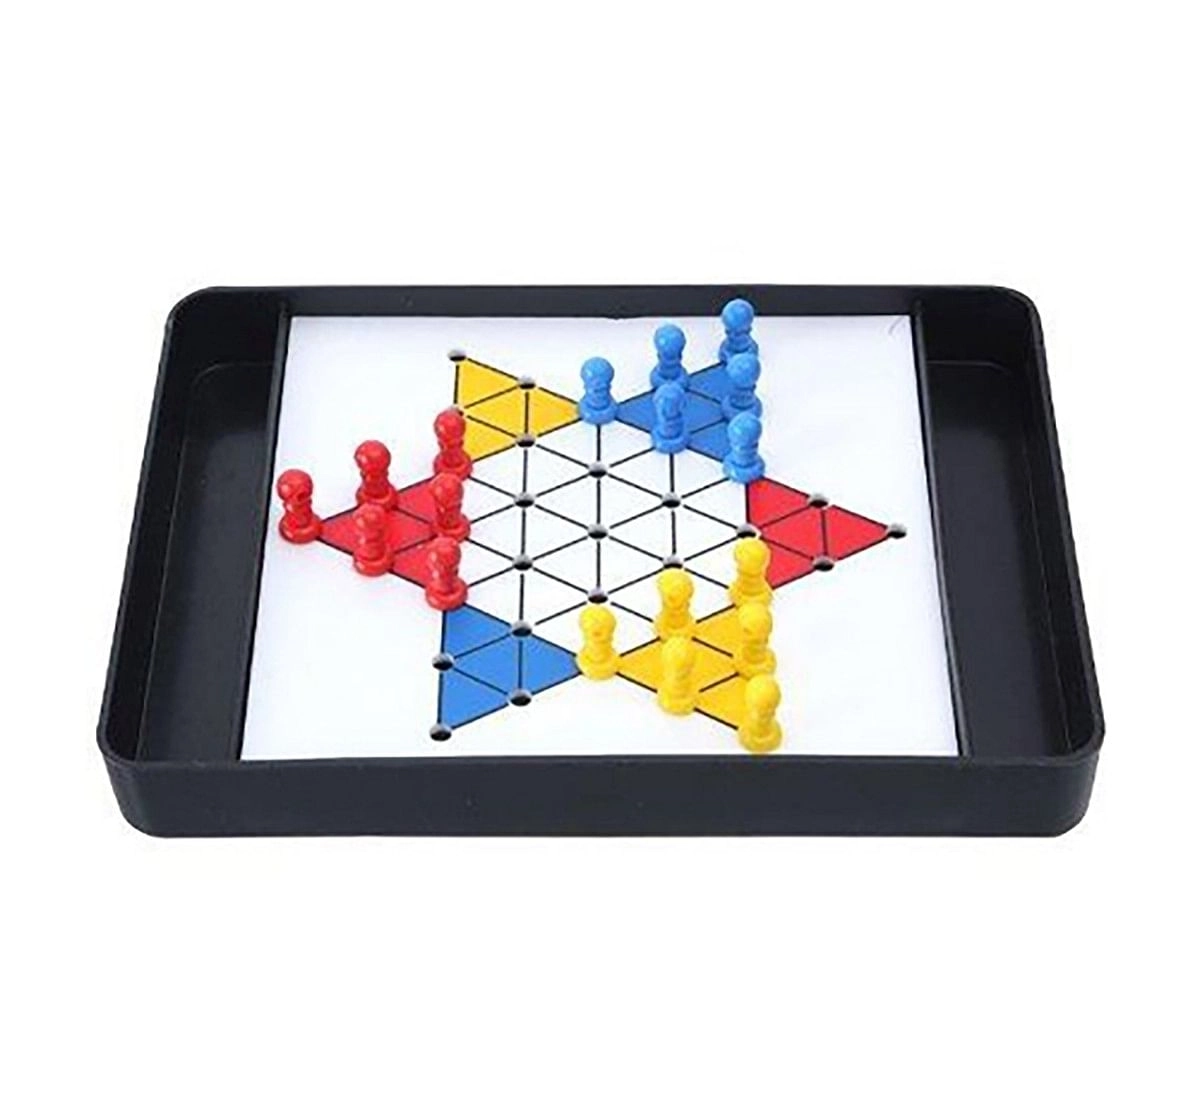 Funskool Travel Chinese Checkers Board Games for Kids age 6Y+ 